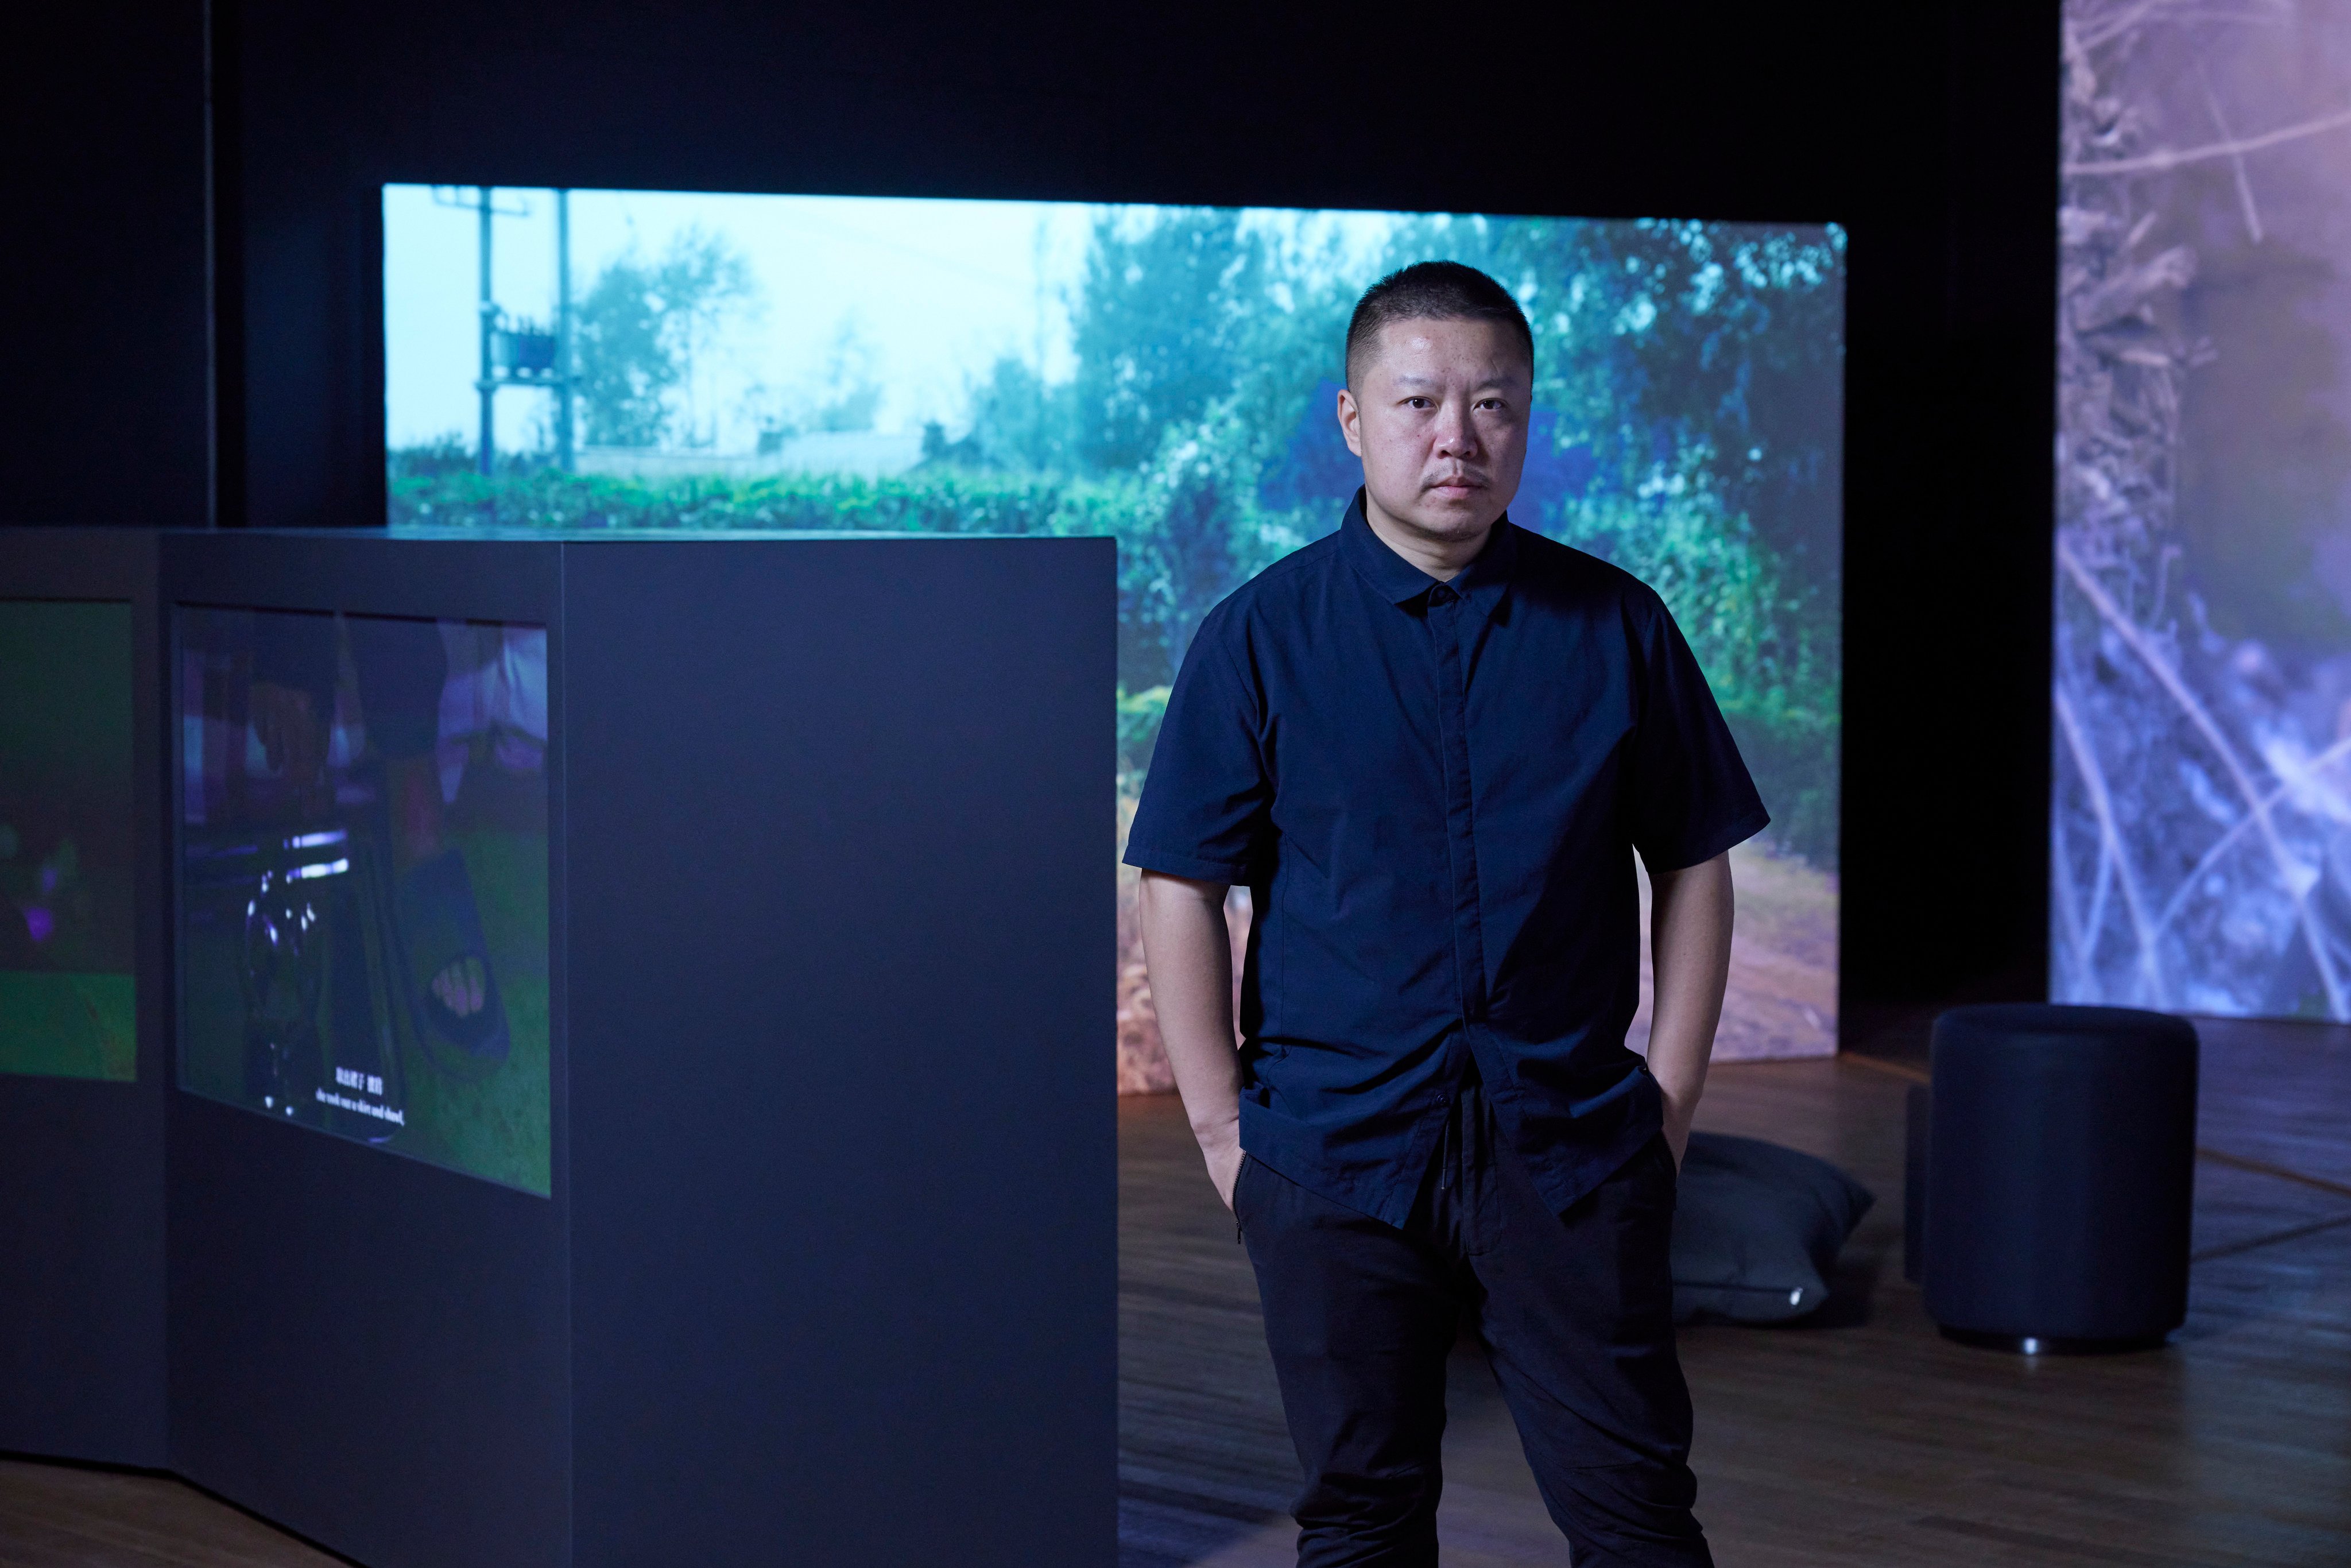 Mainland Chinese artist Wang Tuo with his award-winning video work “The Northeast Tetralogy” at the M+ Sigg Prize 2023 exhibition, in the West Kowloon Cultural District, Hong Kong. Photo: Dan Leung, courtesy of M+ Hong Kong